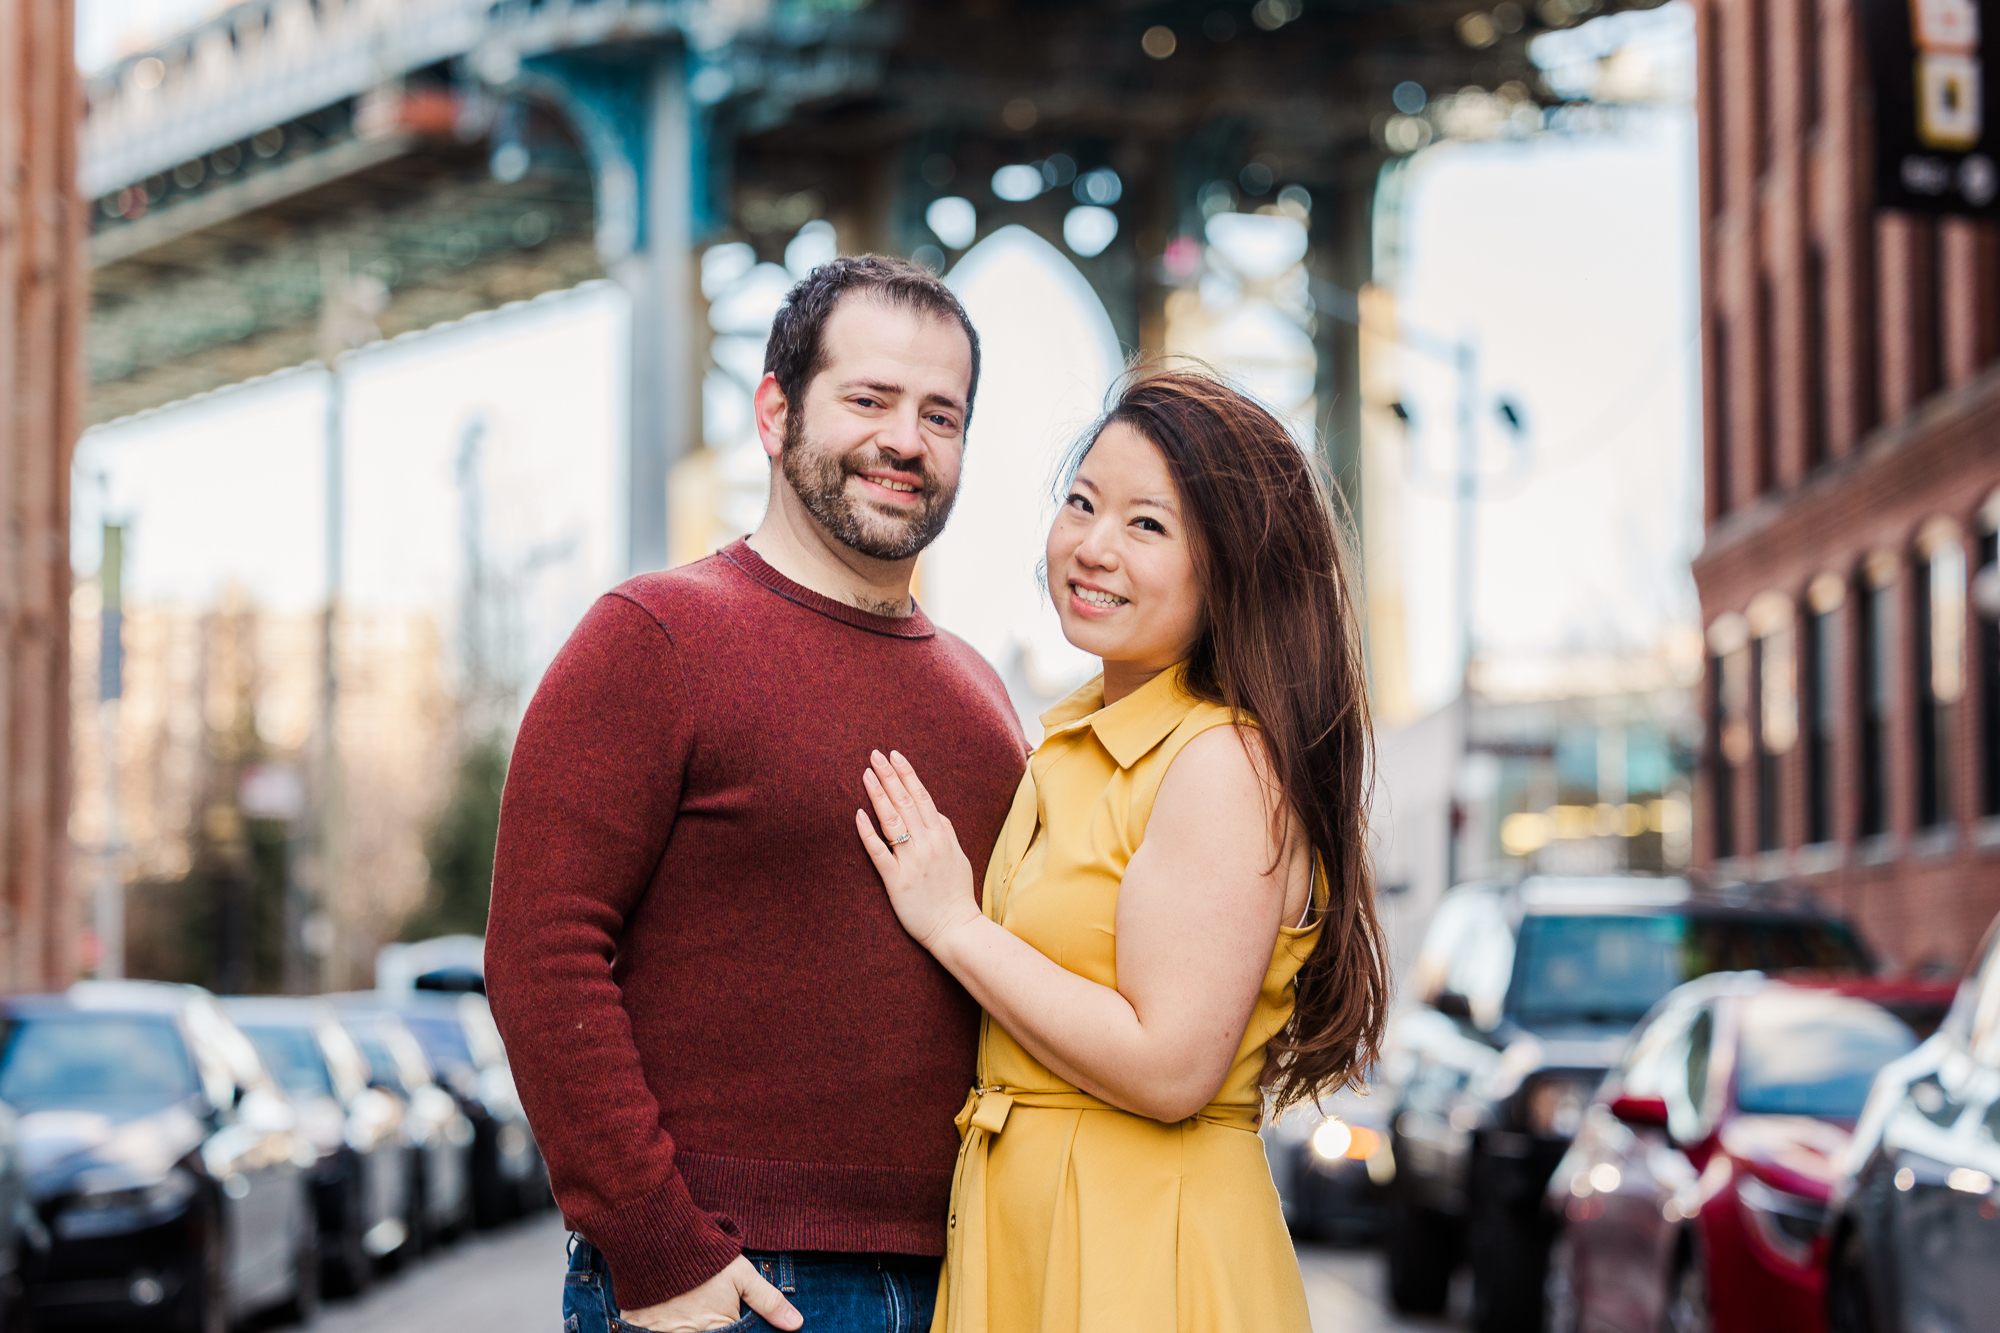 Gorgeous Brooklyn Bridge Engagement Photography with Matching Outfits